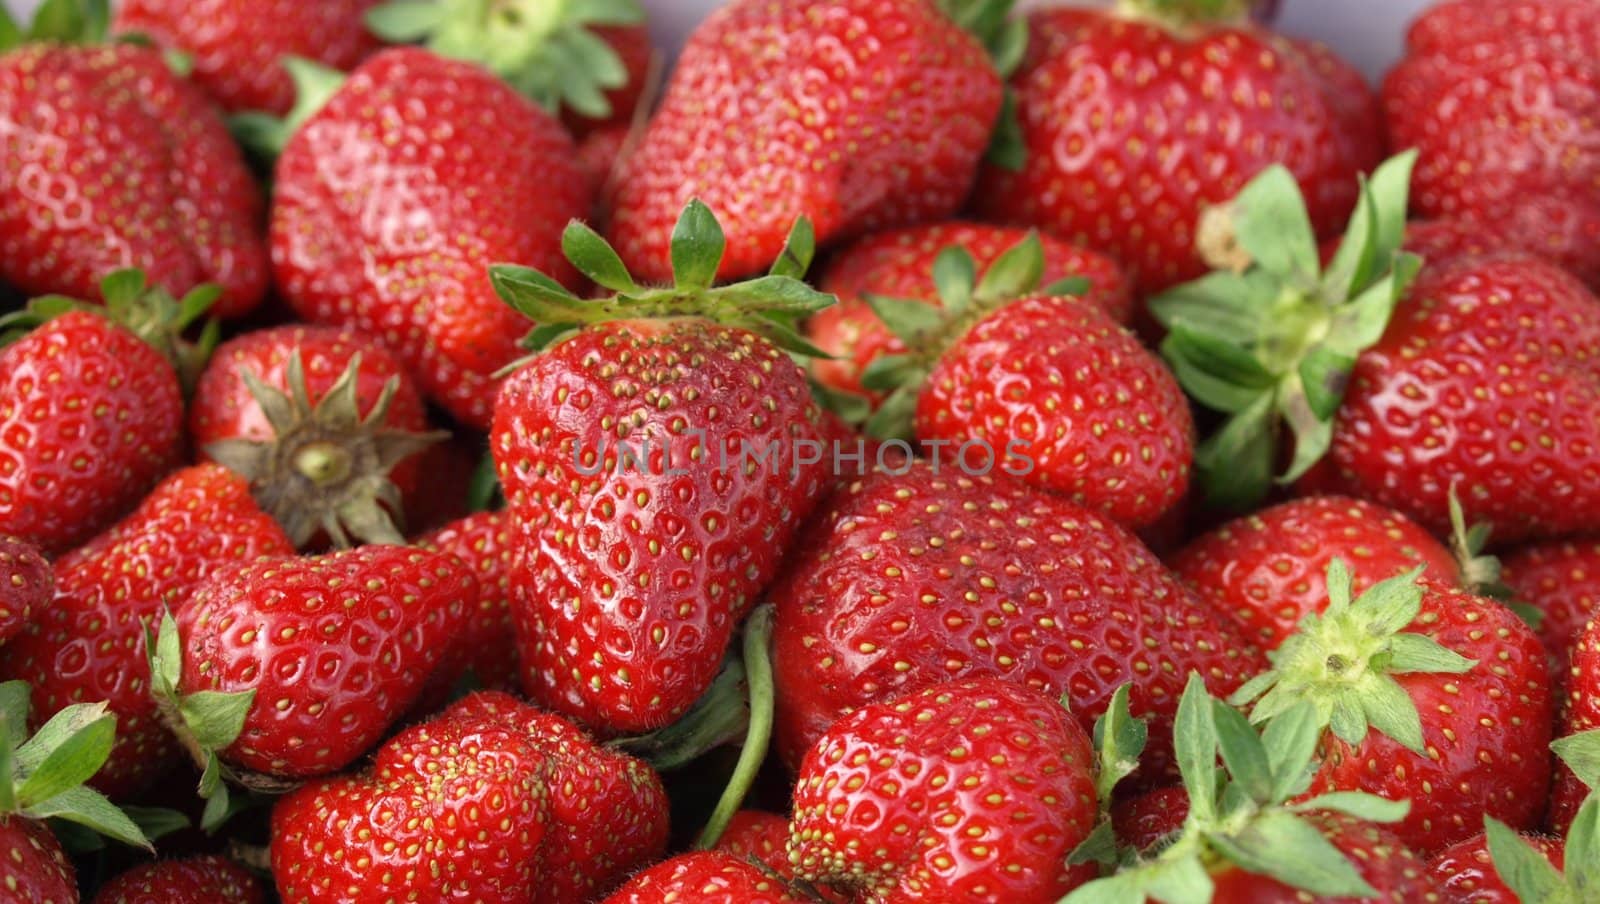 Strawberries for sale at the market